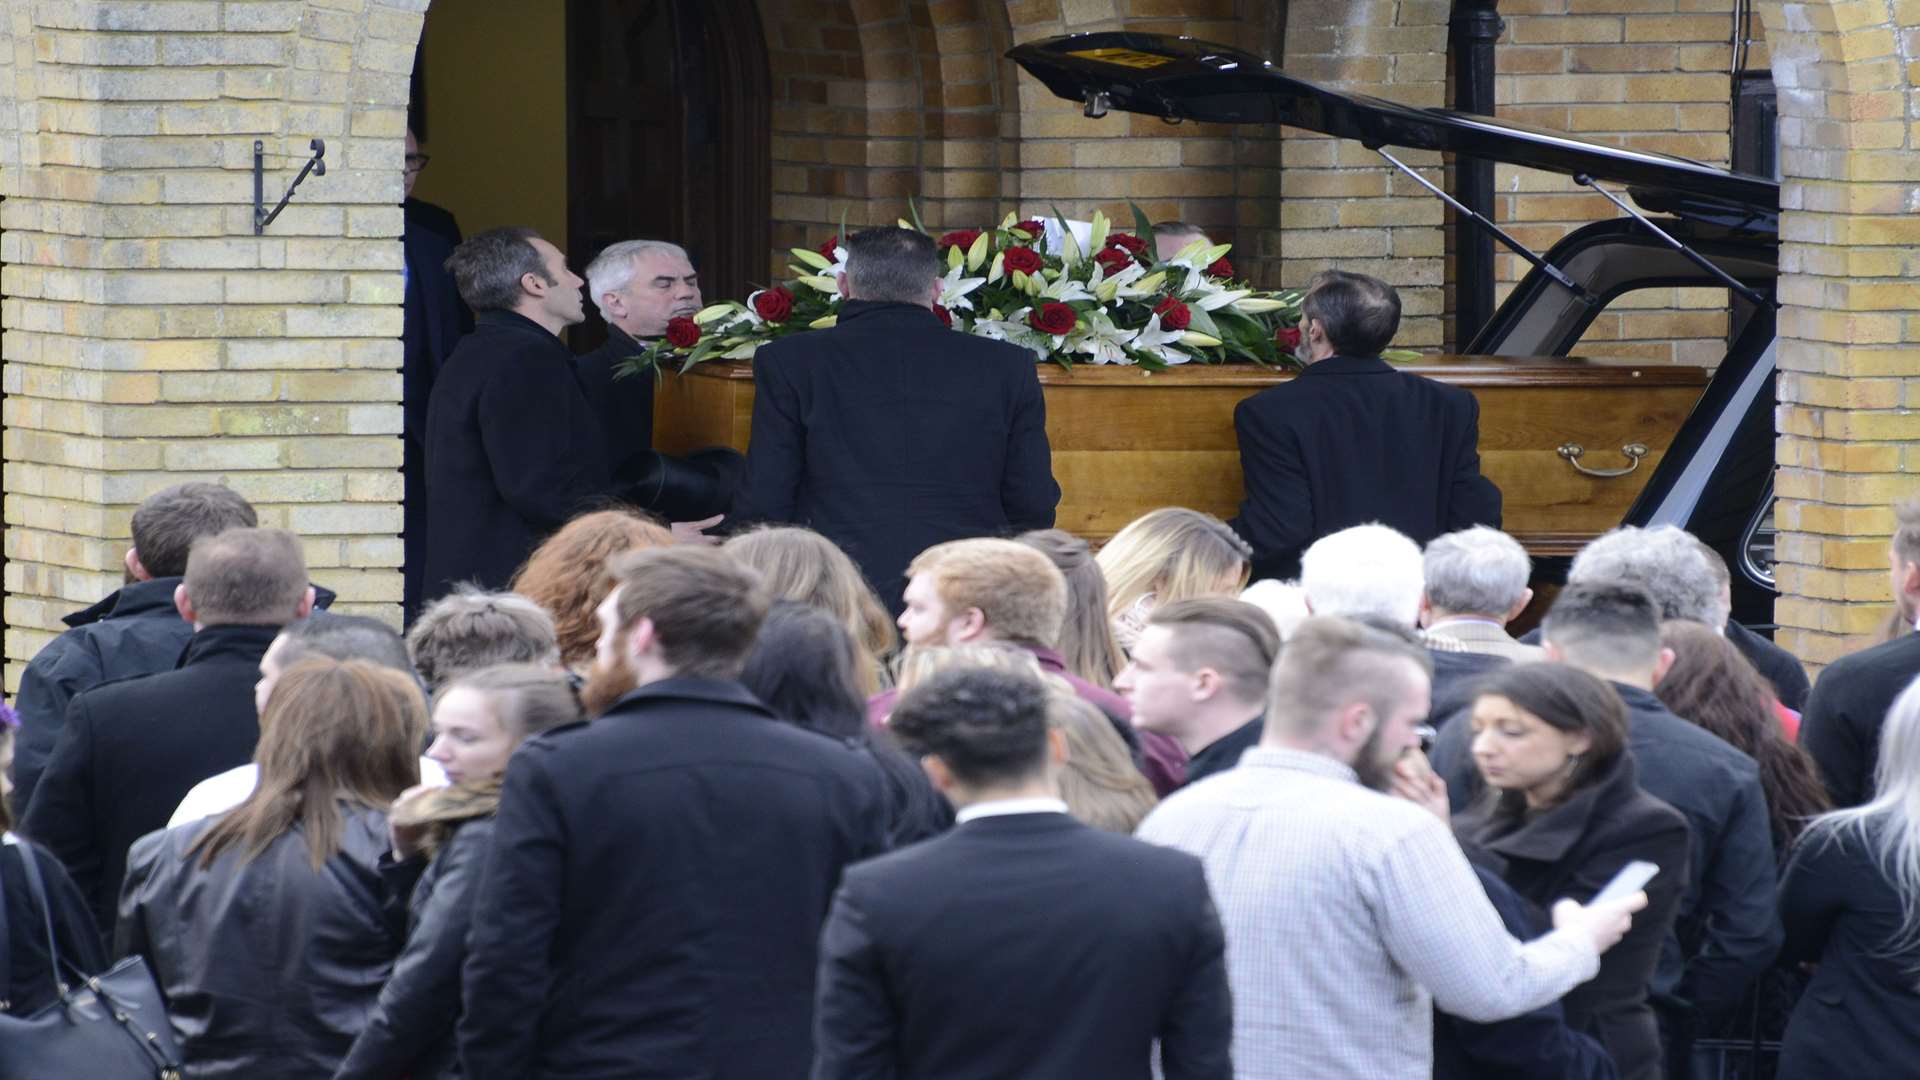 Hundreds of mourners turned up at Barham Crematorium for the service